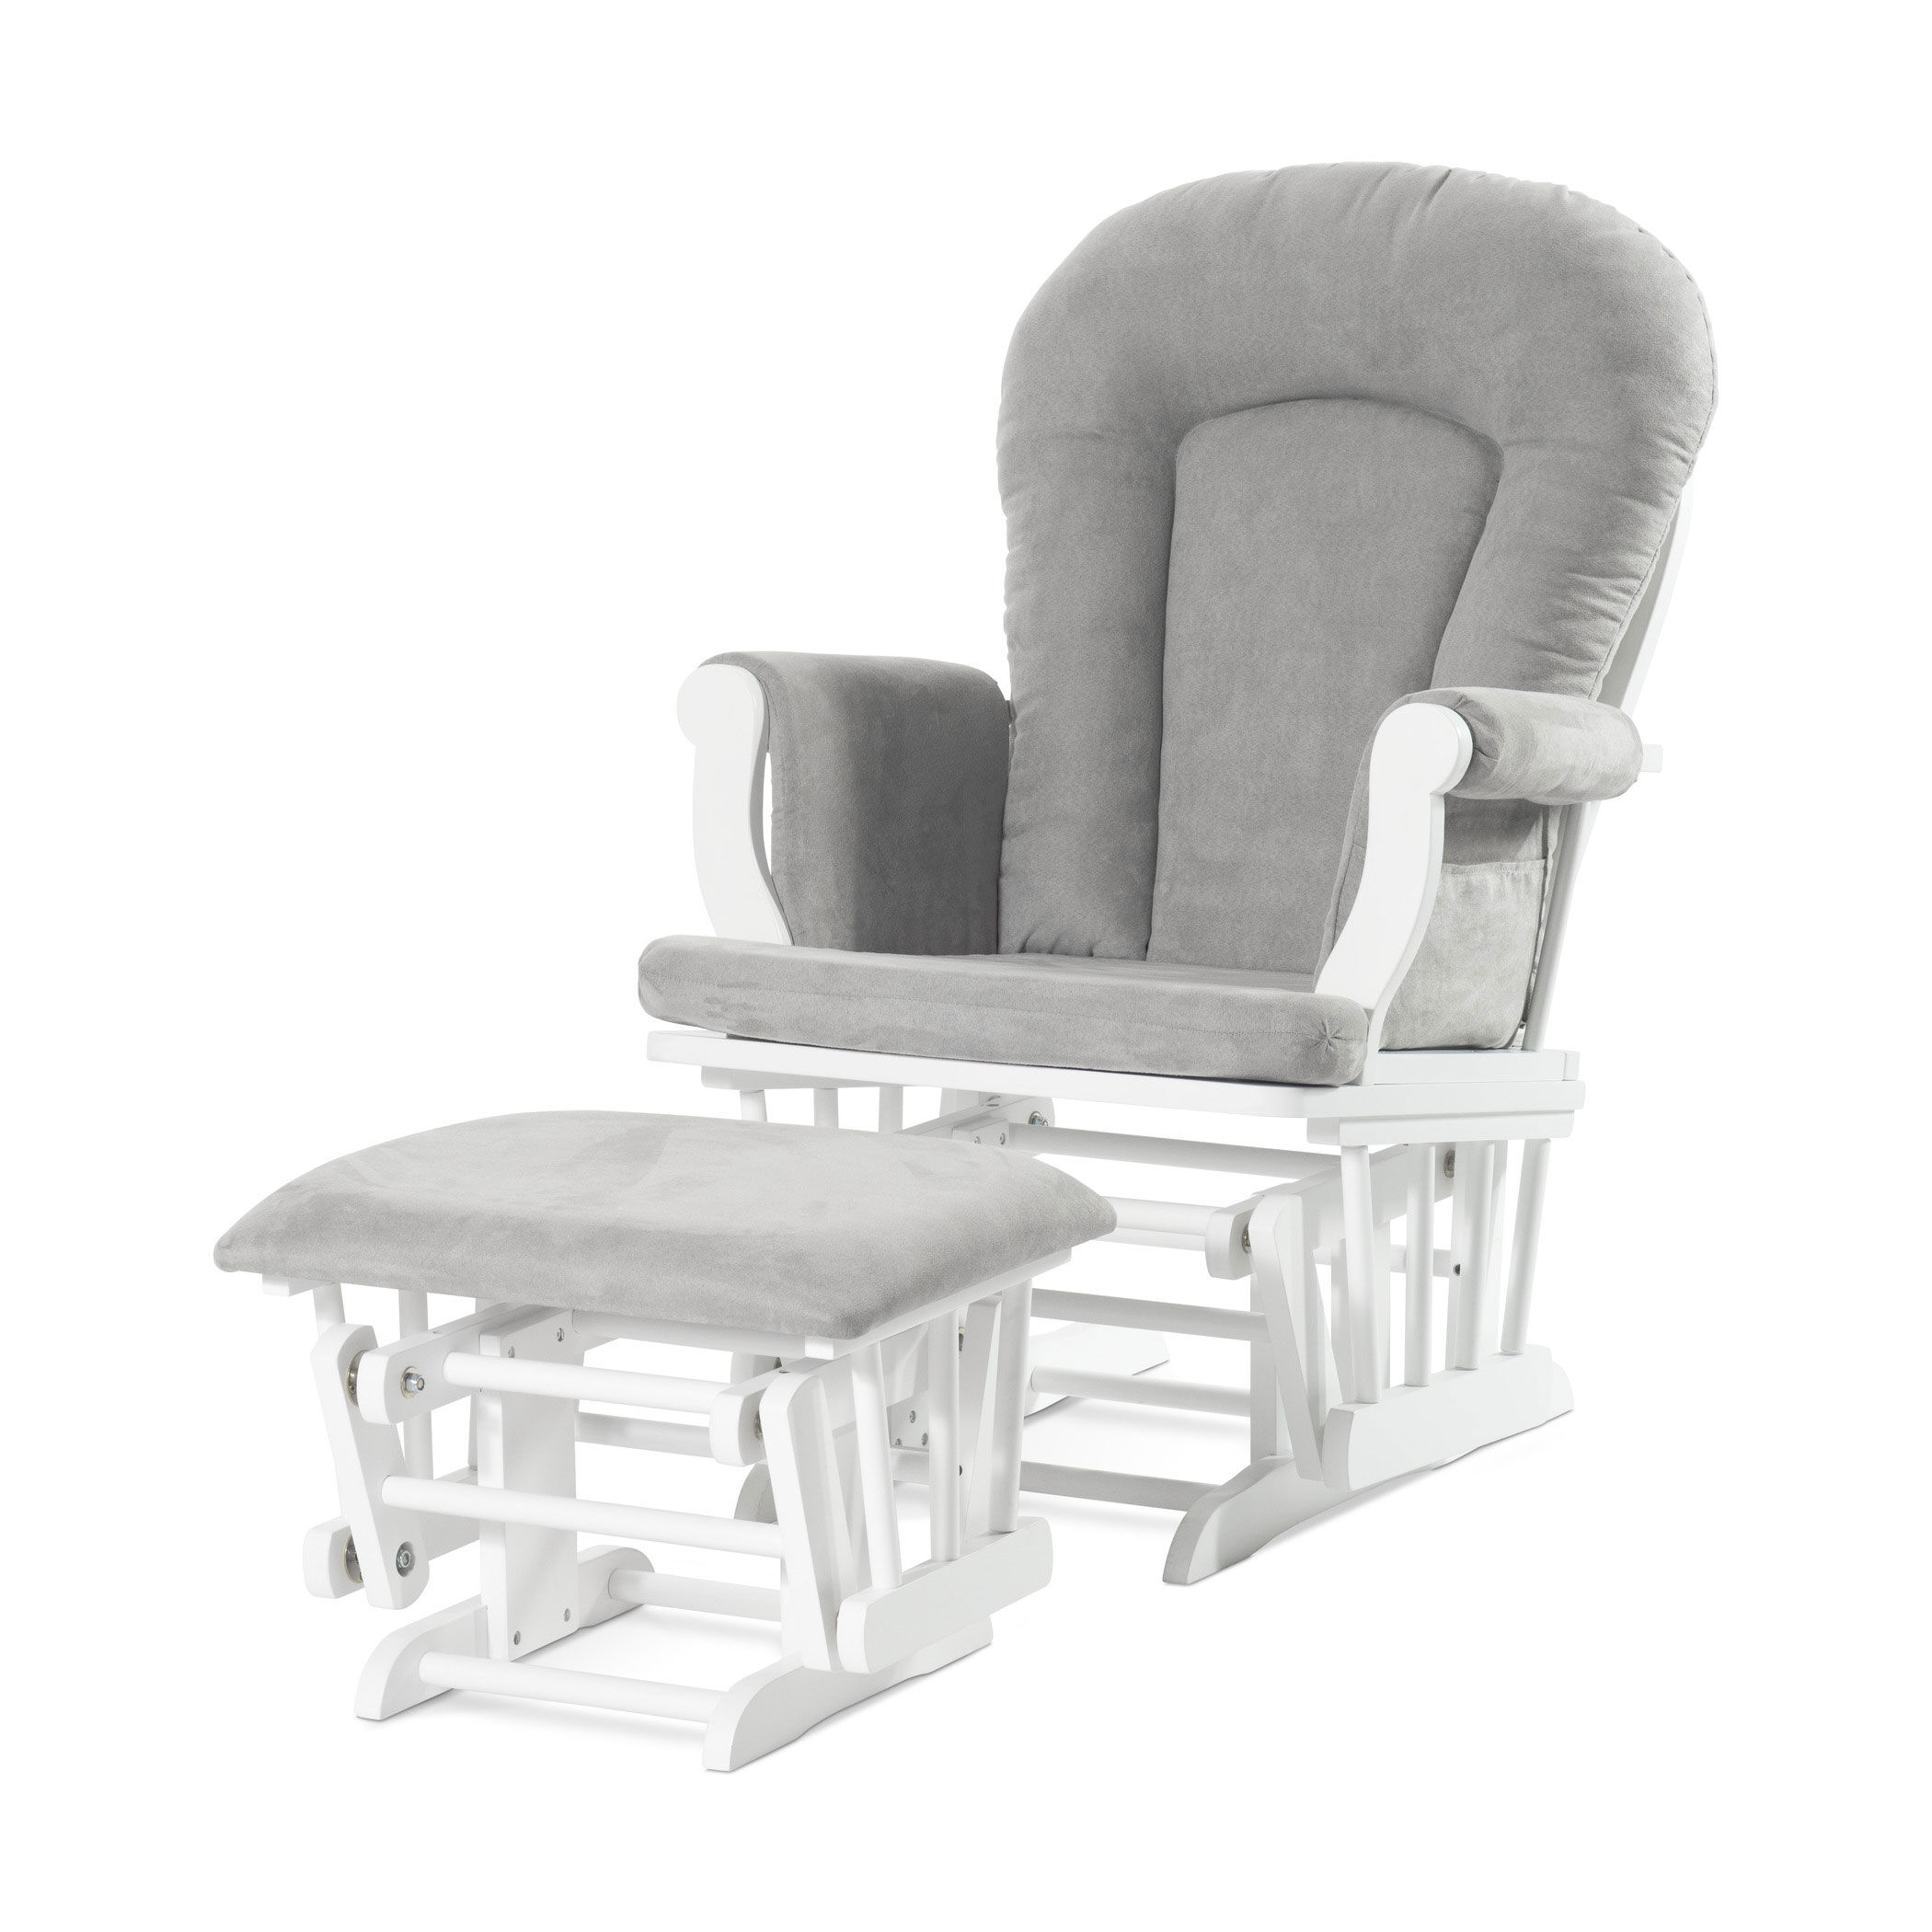 white glider rocker with gray cushions